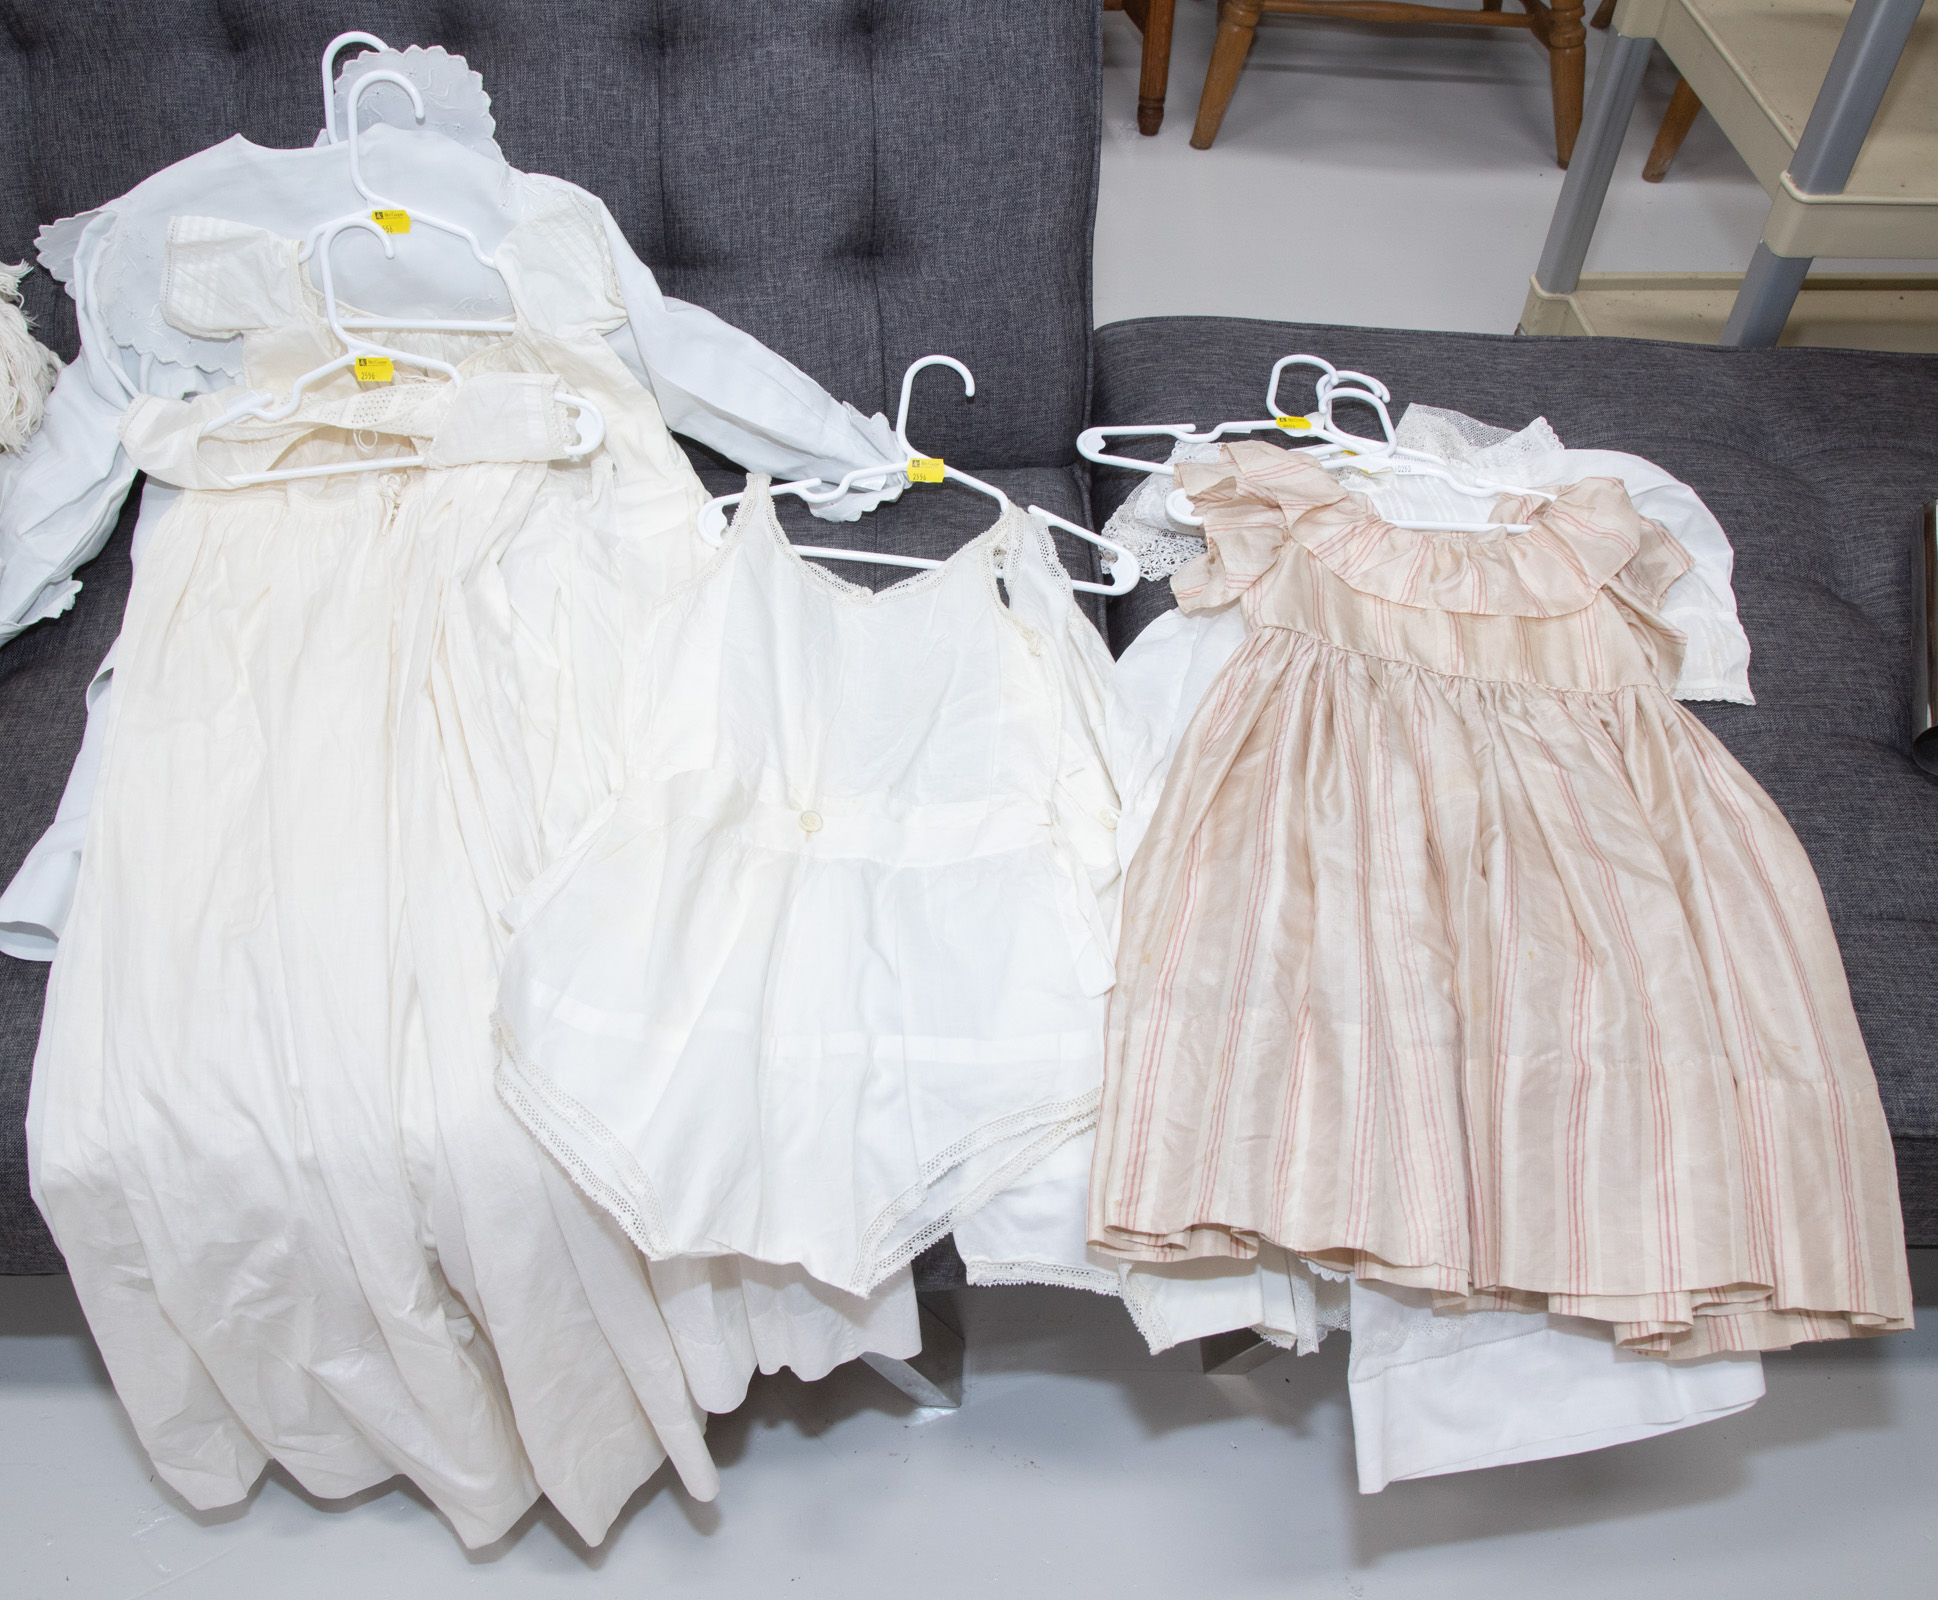 GROUP OF CHILDREN'S CLOTHING Including